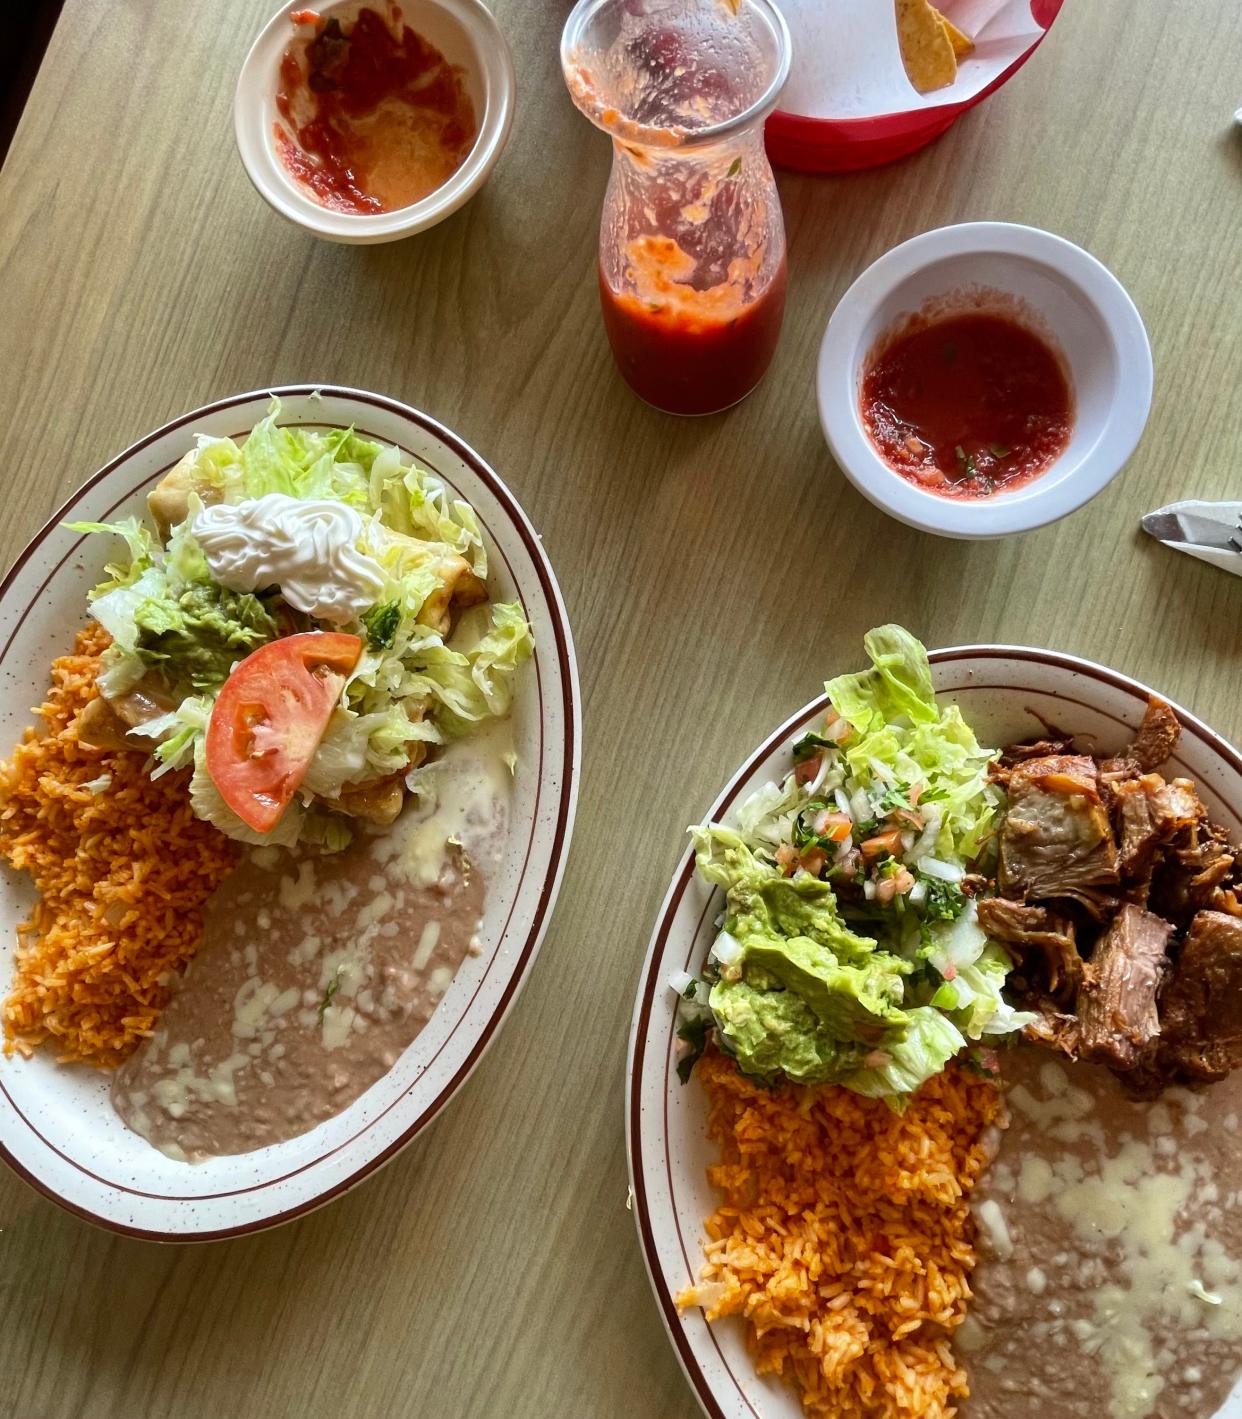 Chimichangas and carnitas at Señor Panchos are served with rice and refried beans.